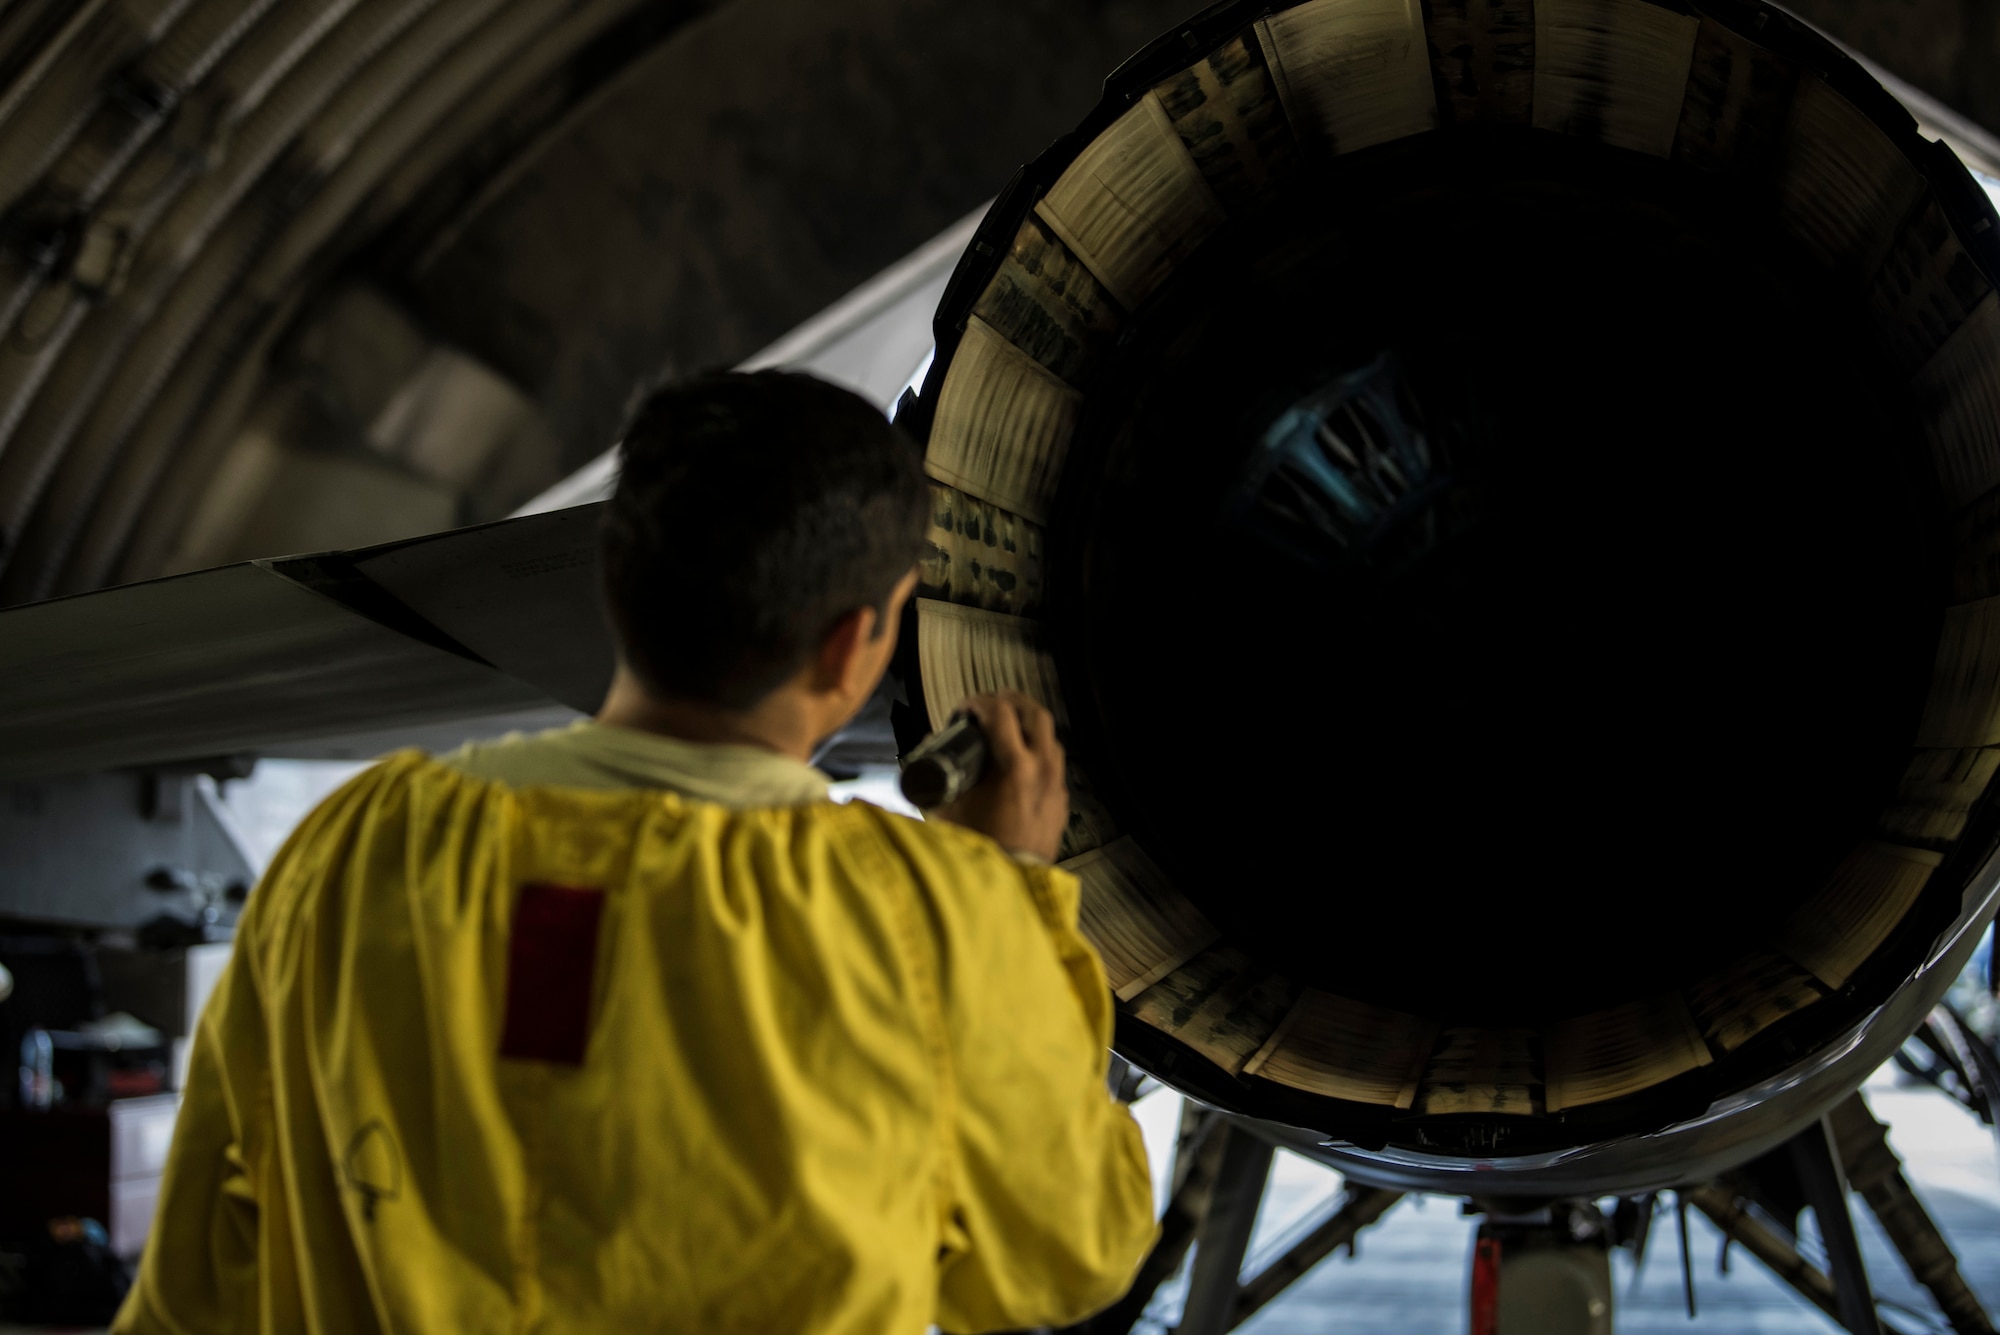 U.S. Air Force Staff Sgt. Martin Perez, 52nd Aircraft Maintenance Squadron tactical aircraft maintainer, inspects an F-16 Fighting Falcon exhaust at Spangdahlem Air Base, Germany, Sept. 13, 2018. The inspection ensured the F-16 had no discrepancies, guaranteeing it was safe to fly. Perez performs aircraft inspections in addition to his regular dedicated crew chief duties. (U.S. Air Force photo by Airman 1st Class Valerie Seelye)